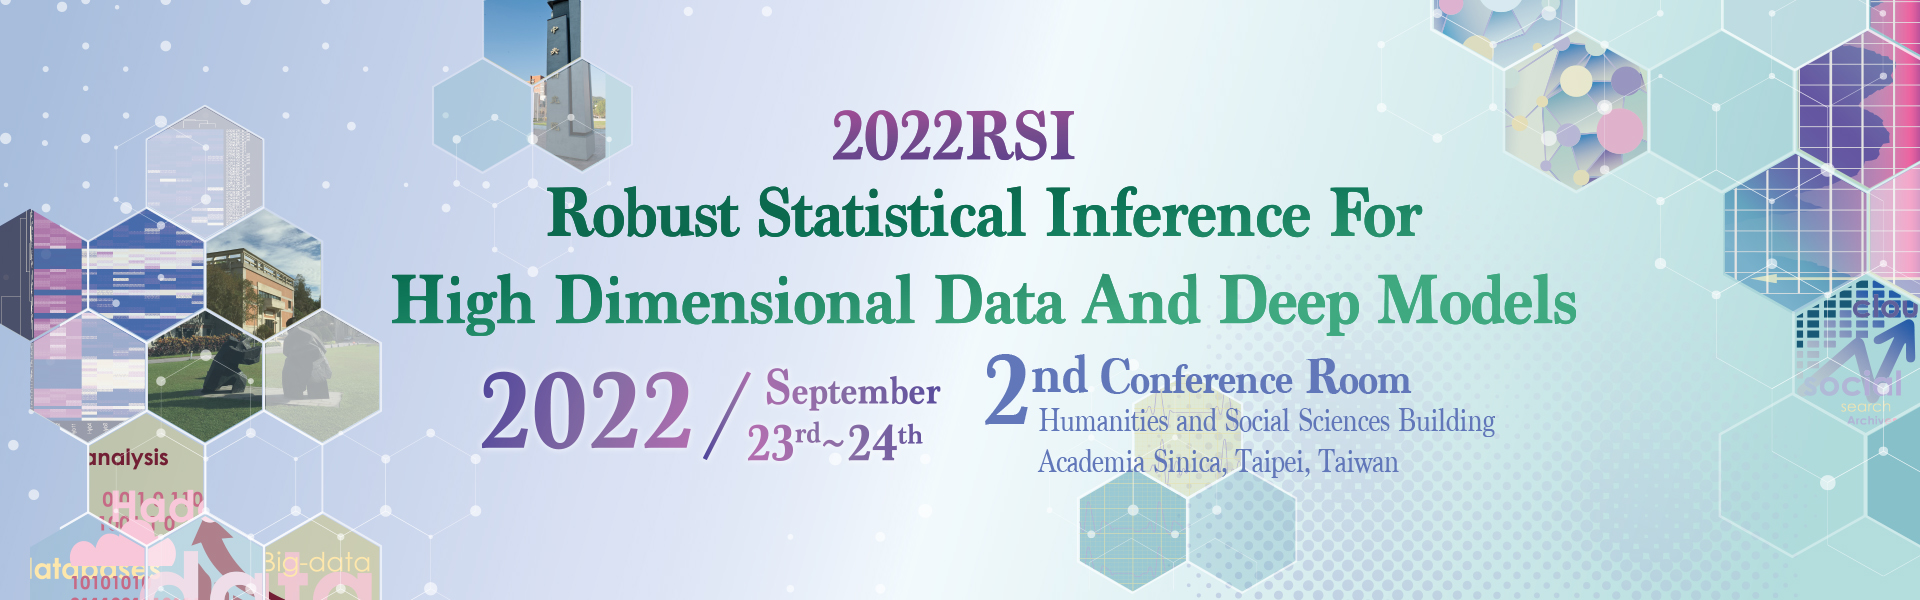 2022Robust Statistical Inference For High Dimensional Data And Deep Models